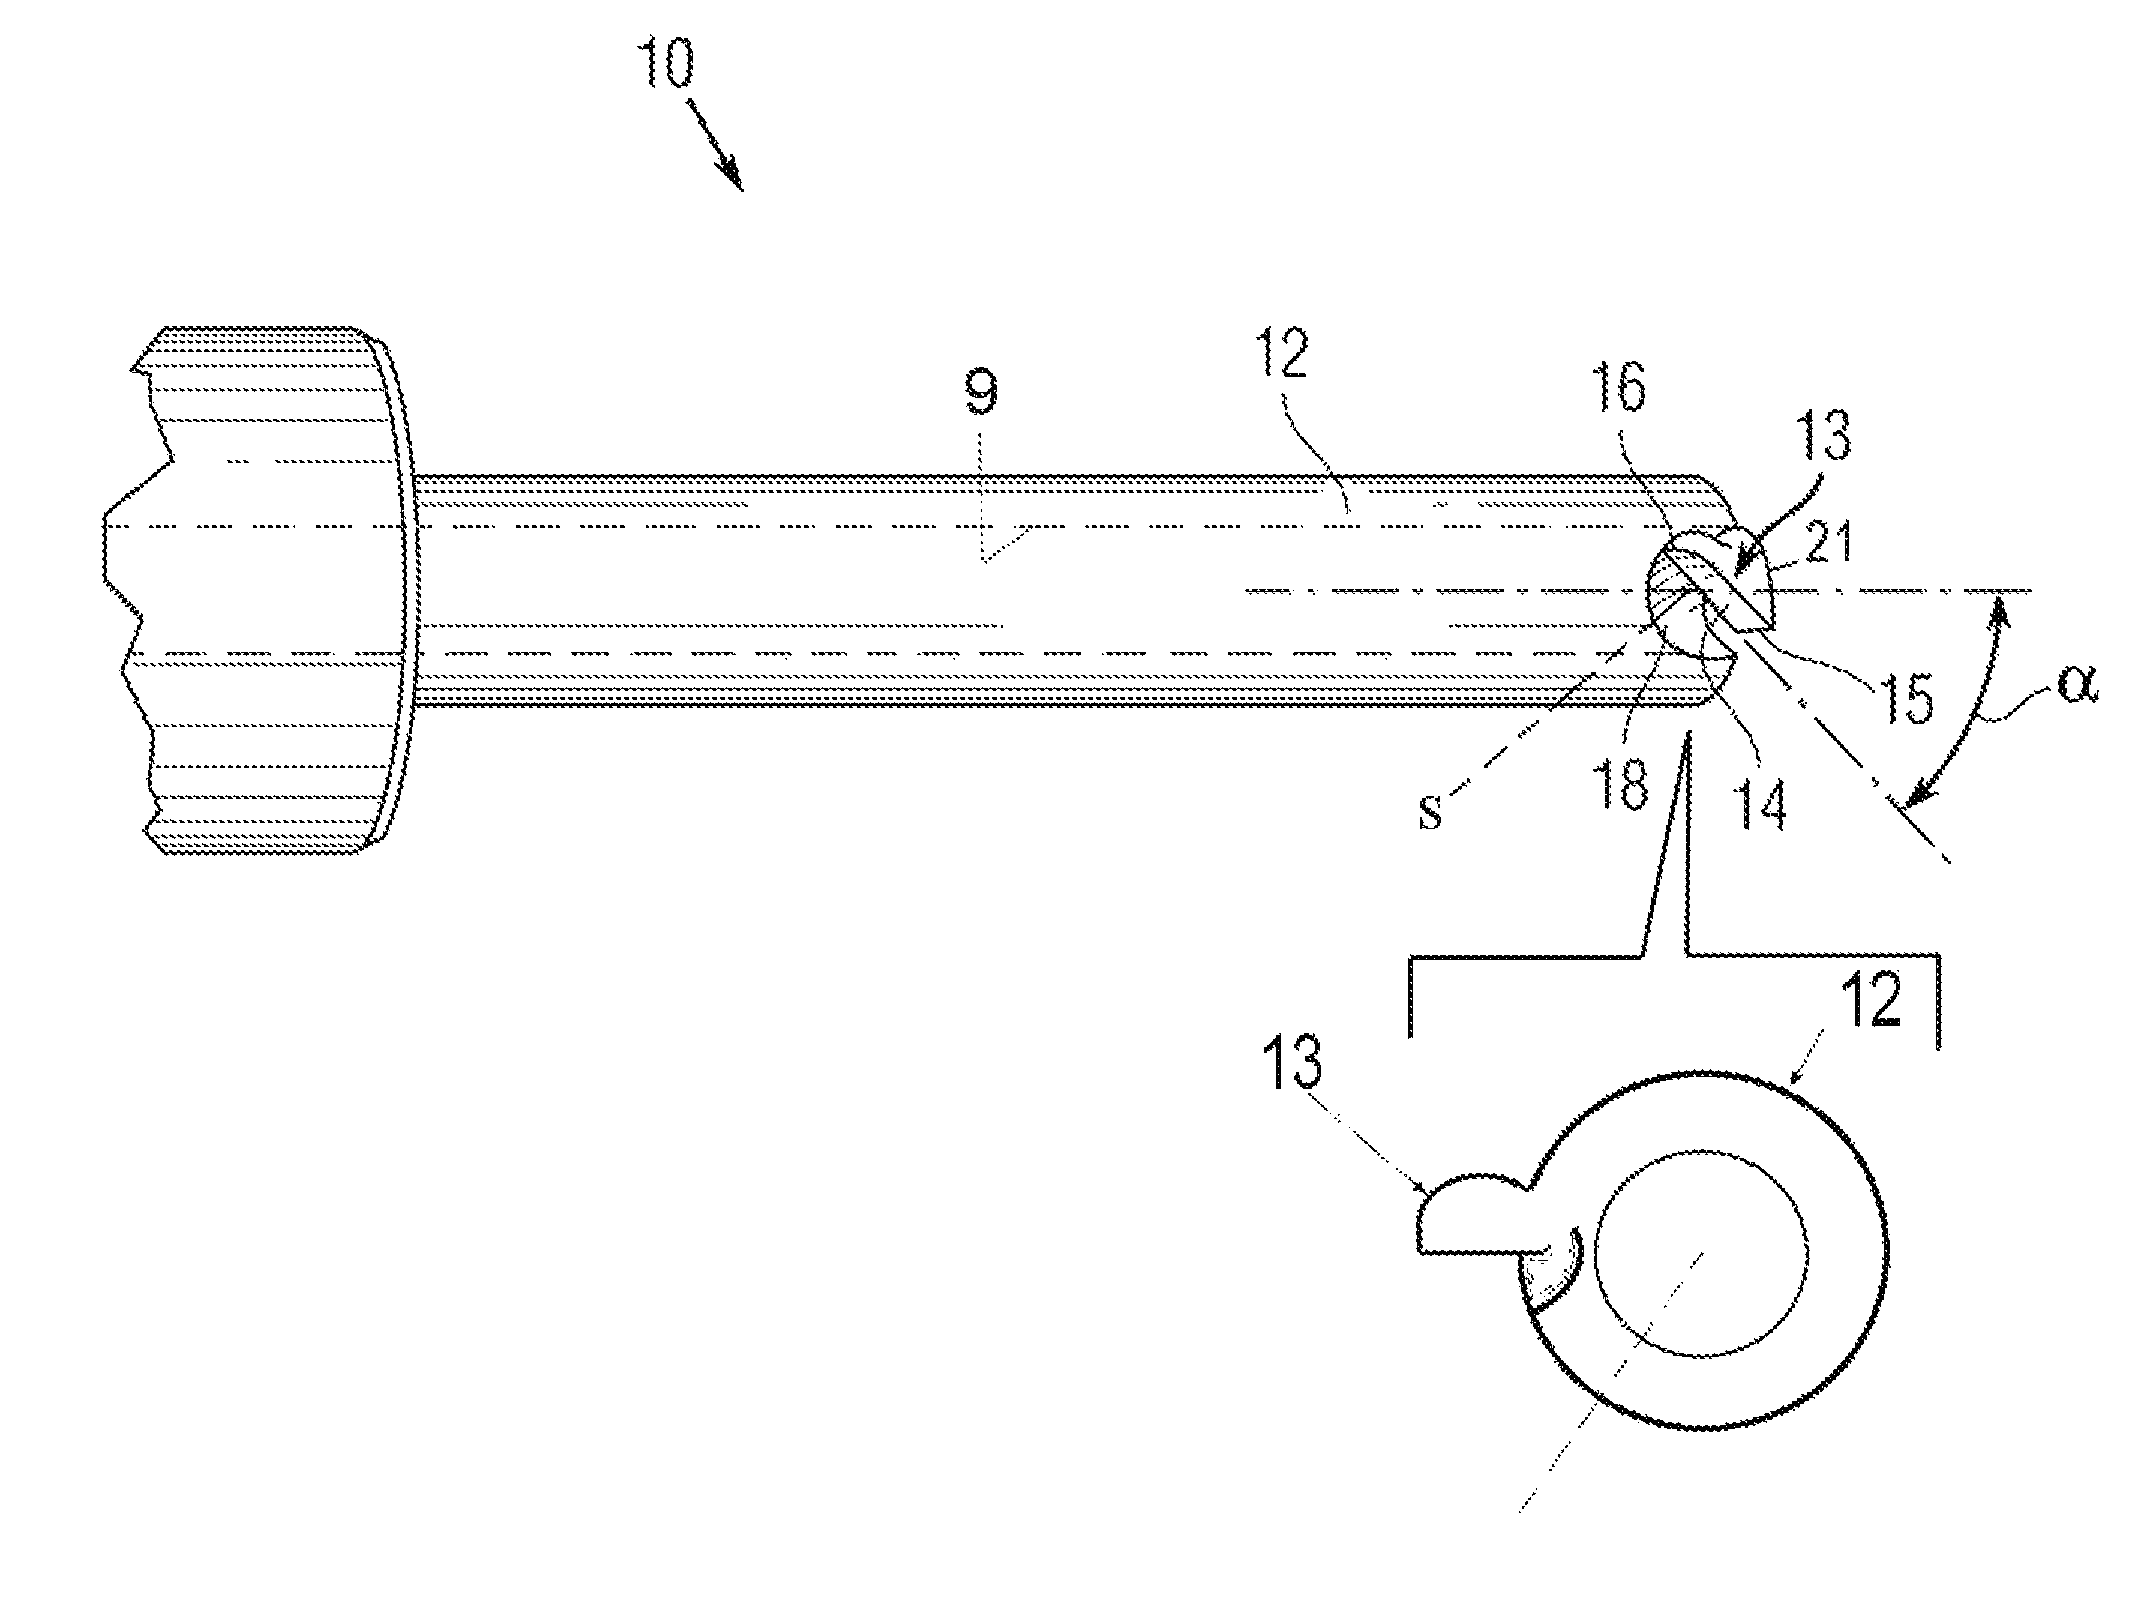 Device for stripping sheathing on unbonded post-tensioning tendons